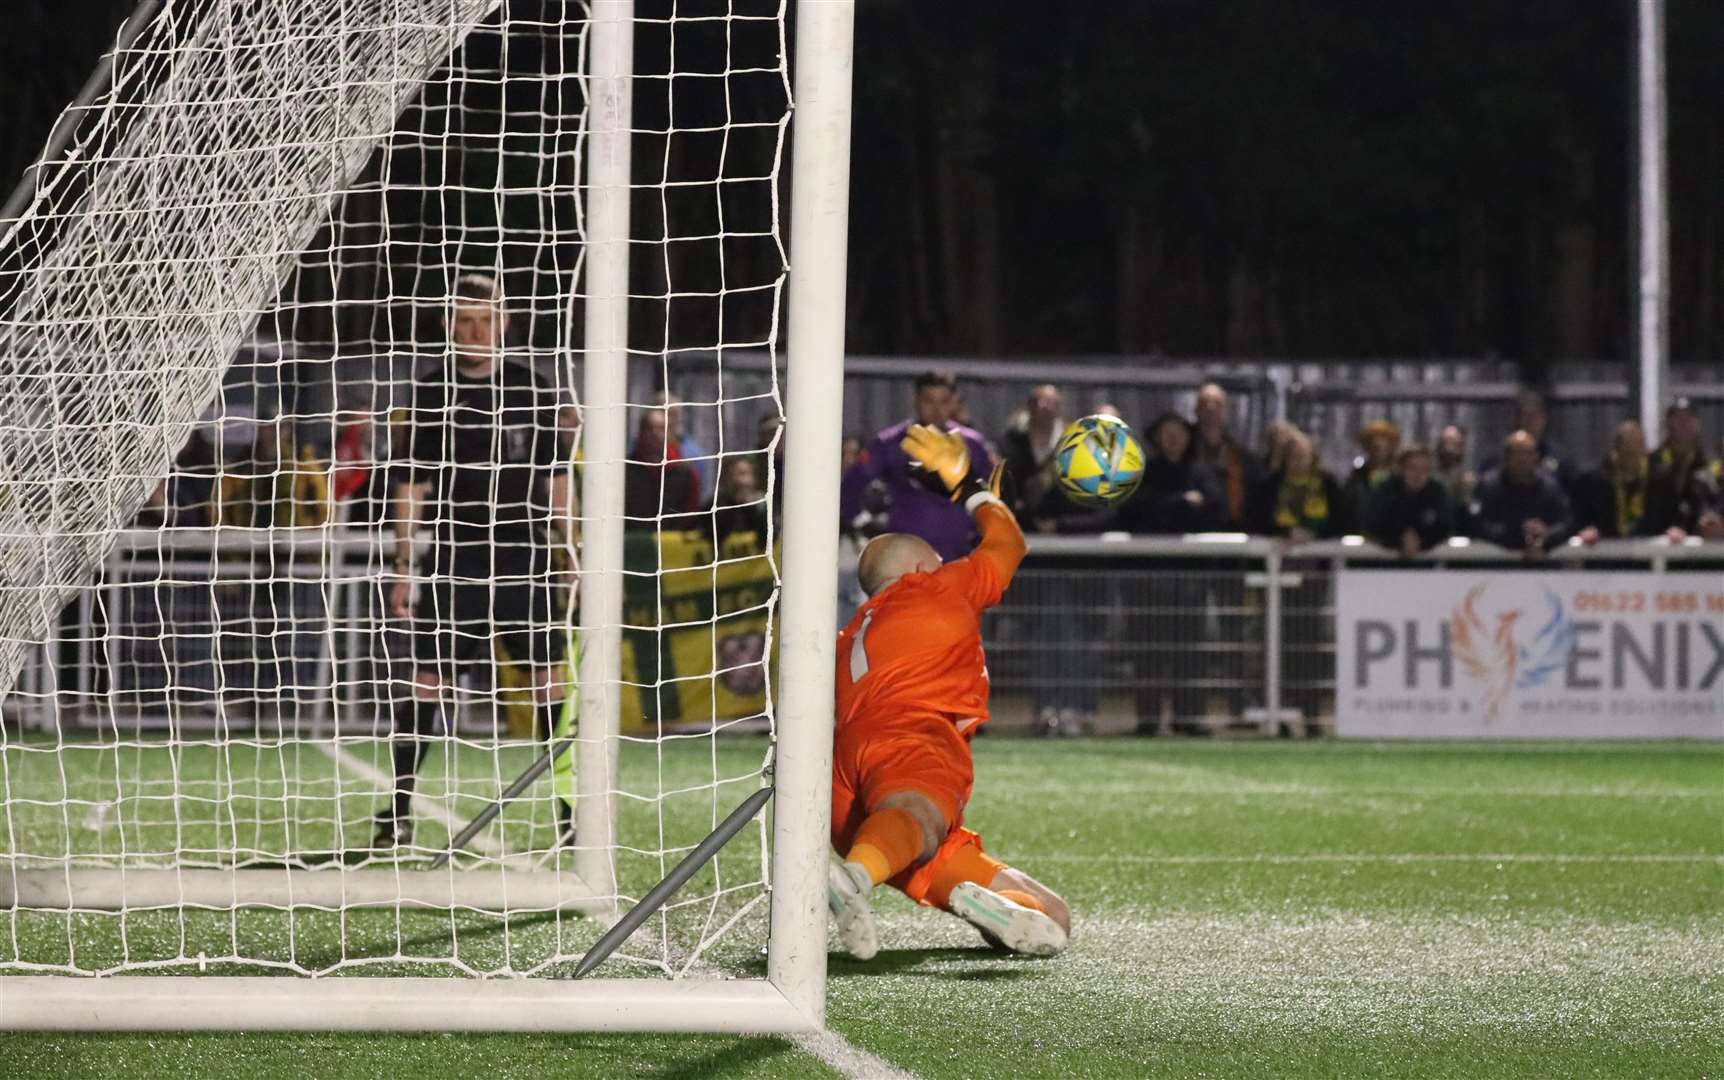 Chatham Town won the penalty shootout 4-3 after Mitchell Beeney saved twice Picture: Max English